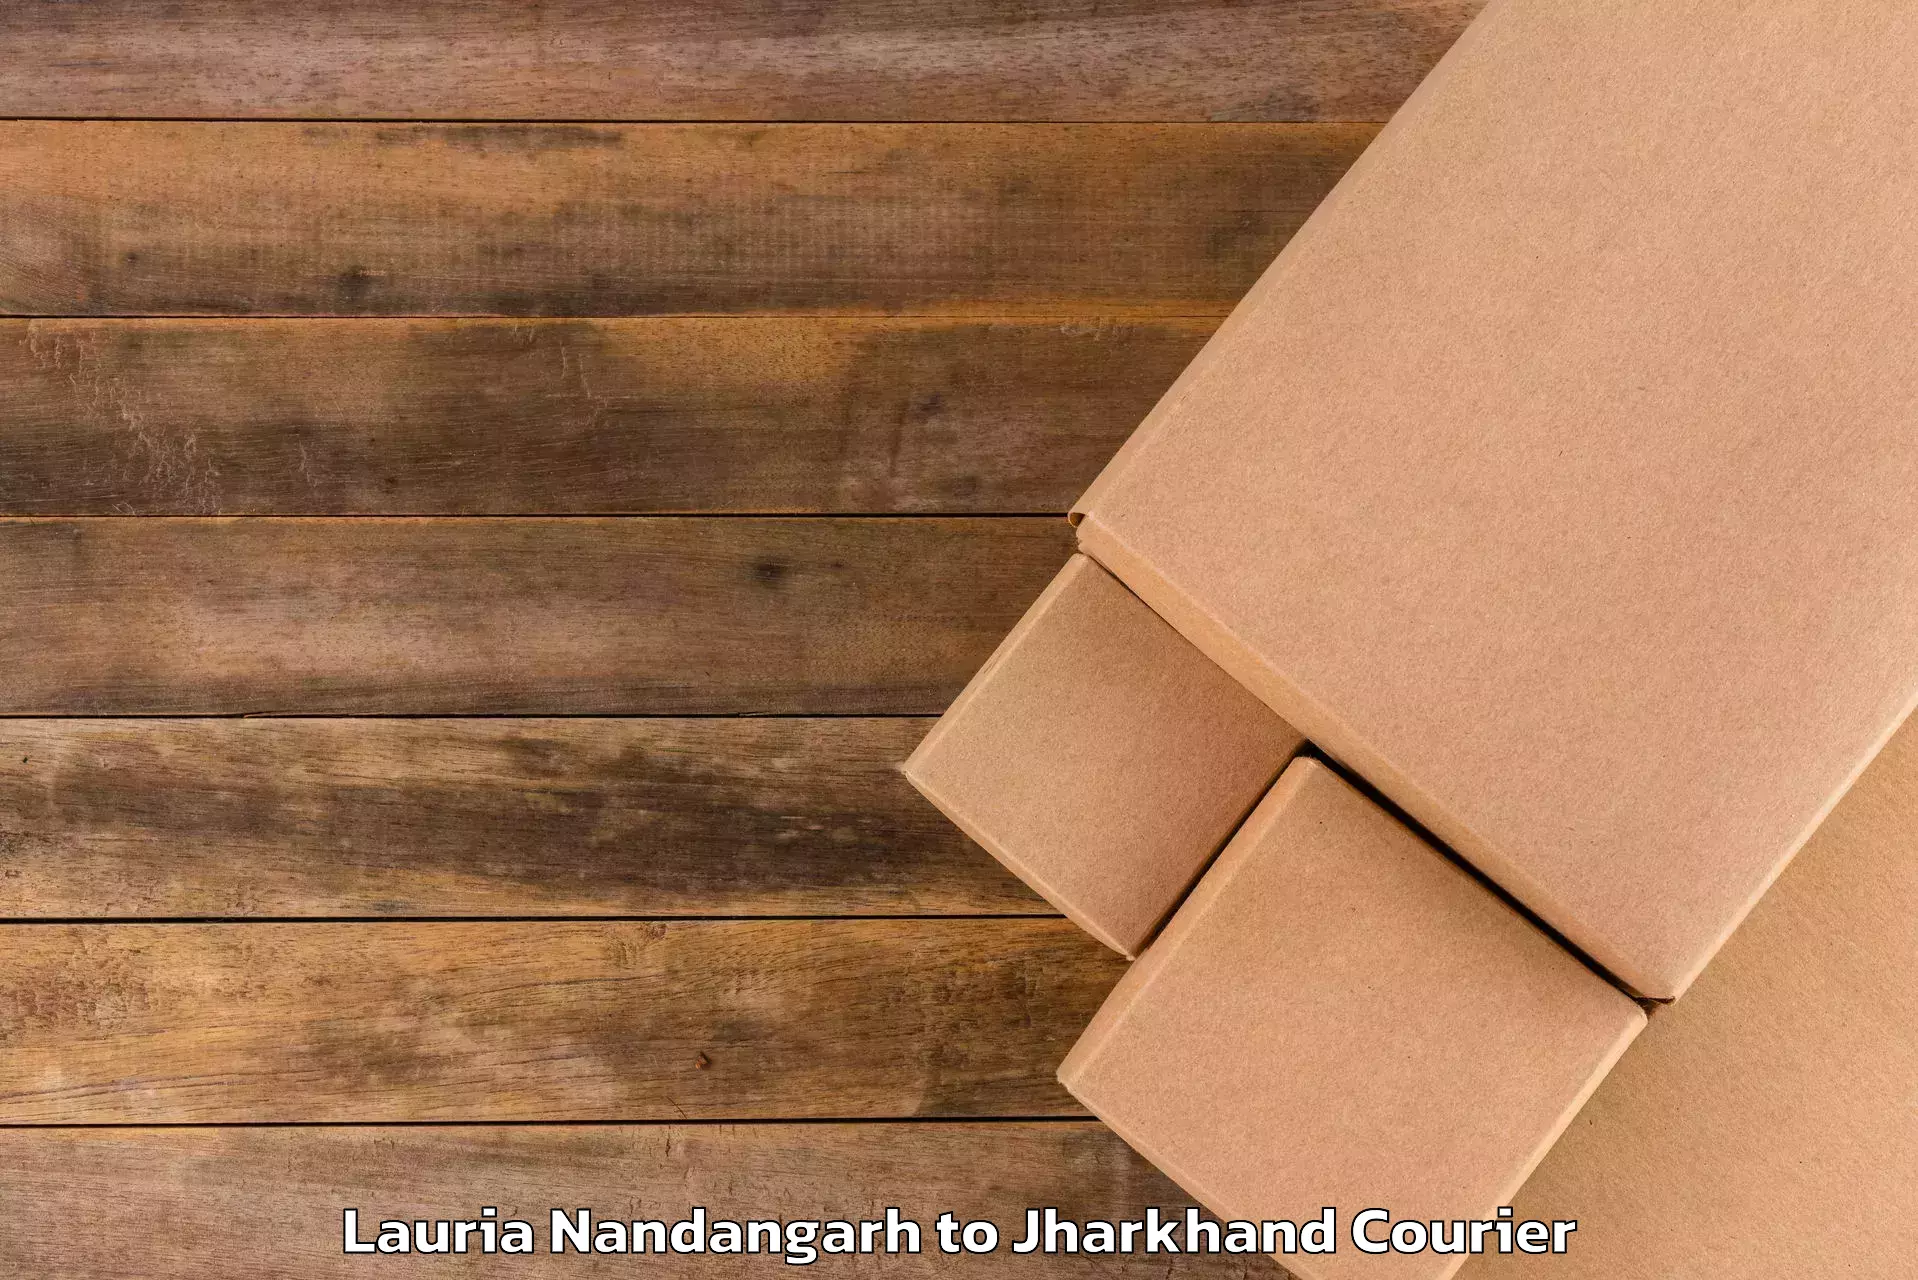 Hassle-free luggage shipping Lauria Nandangarh to Jharkhand